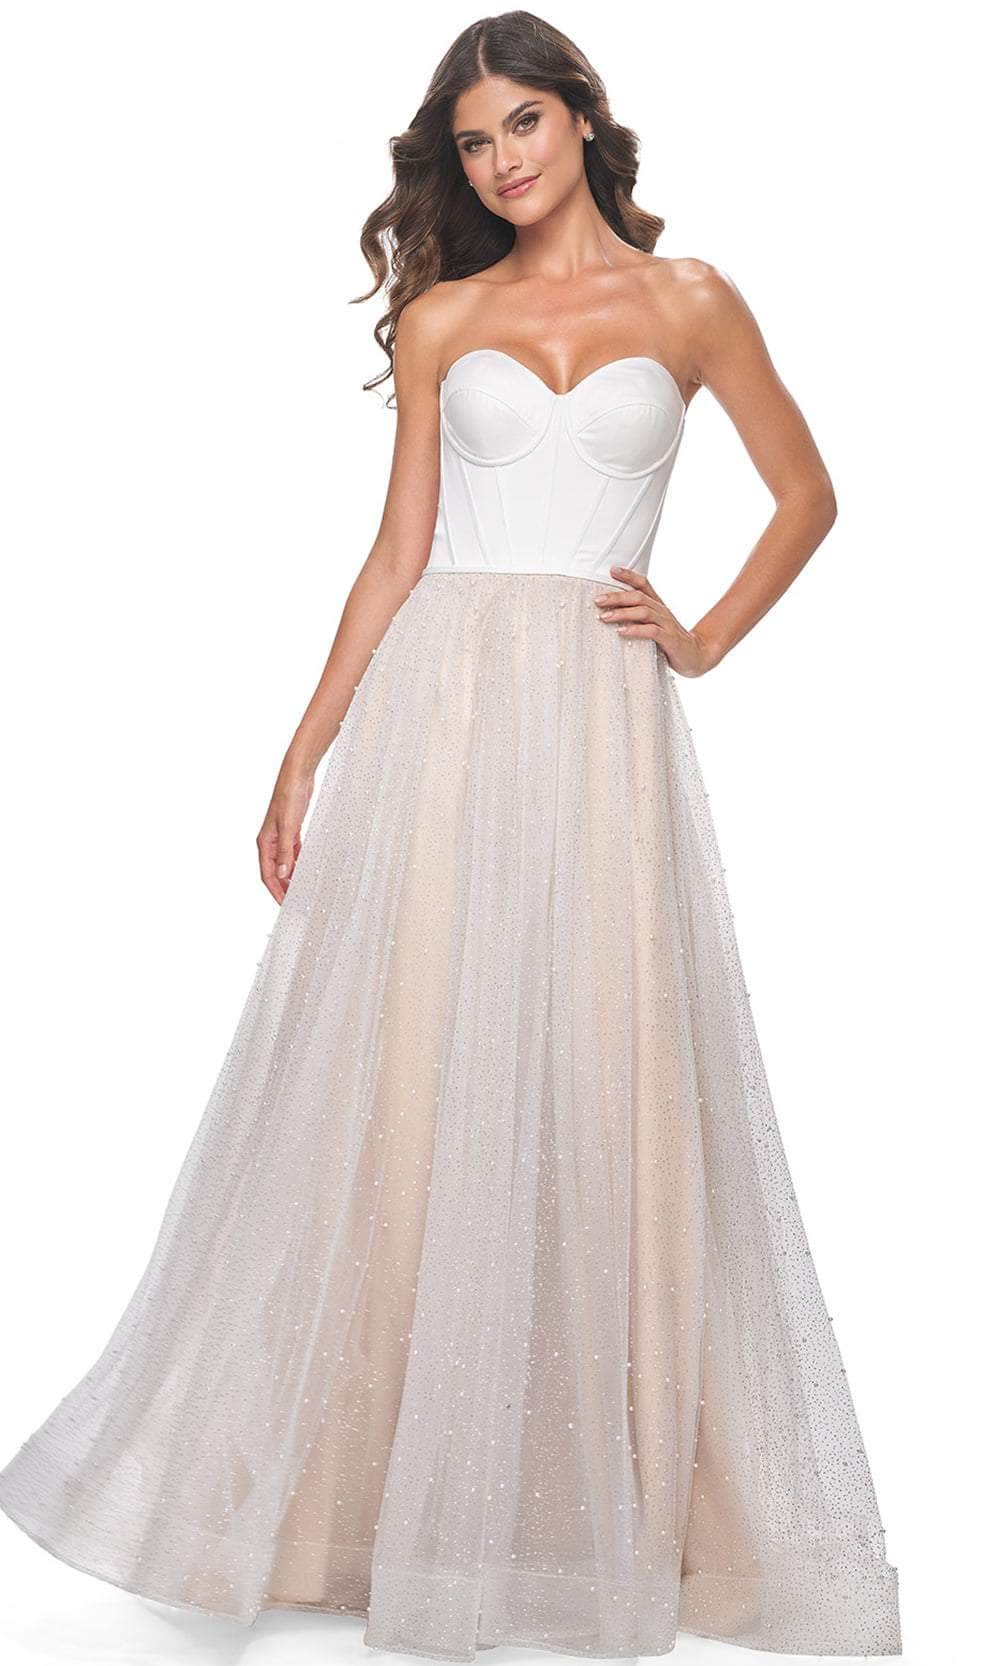 La Femme 32149 - Pearl Accented A-Line Prom Gown Prom Dresses